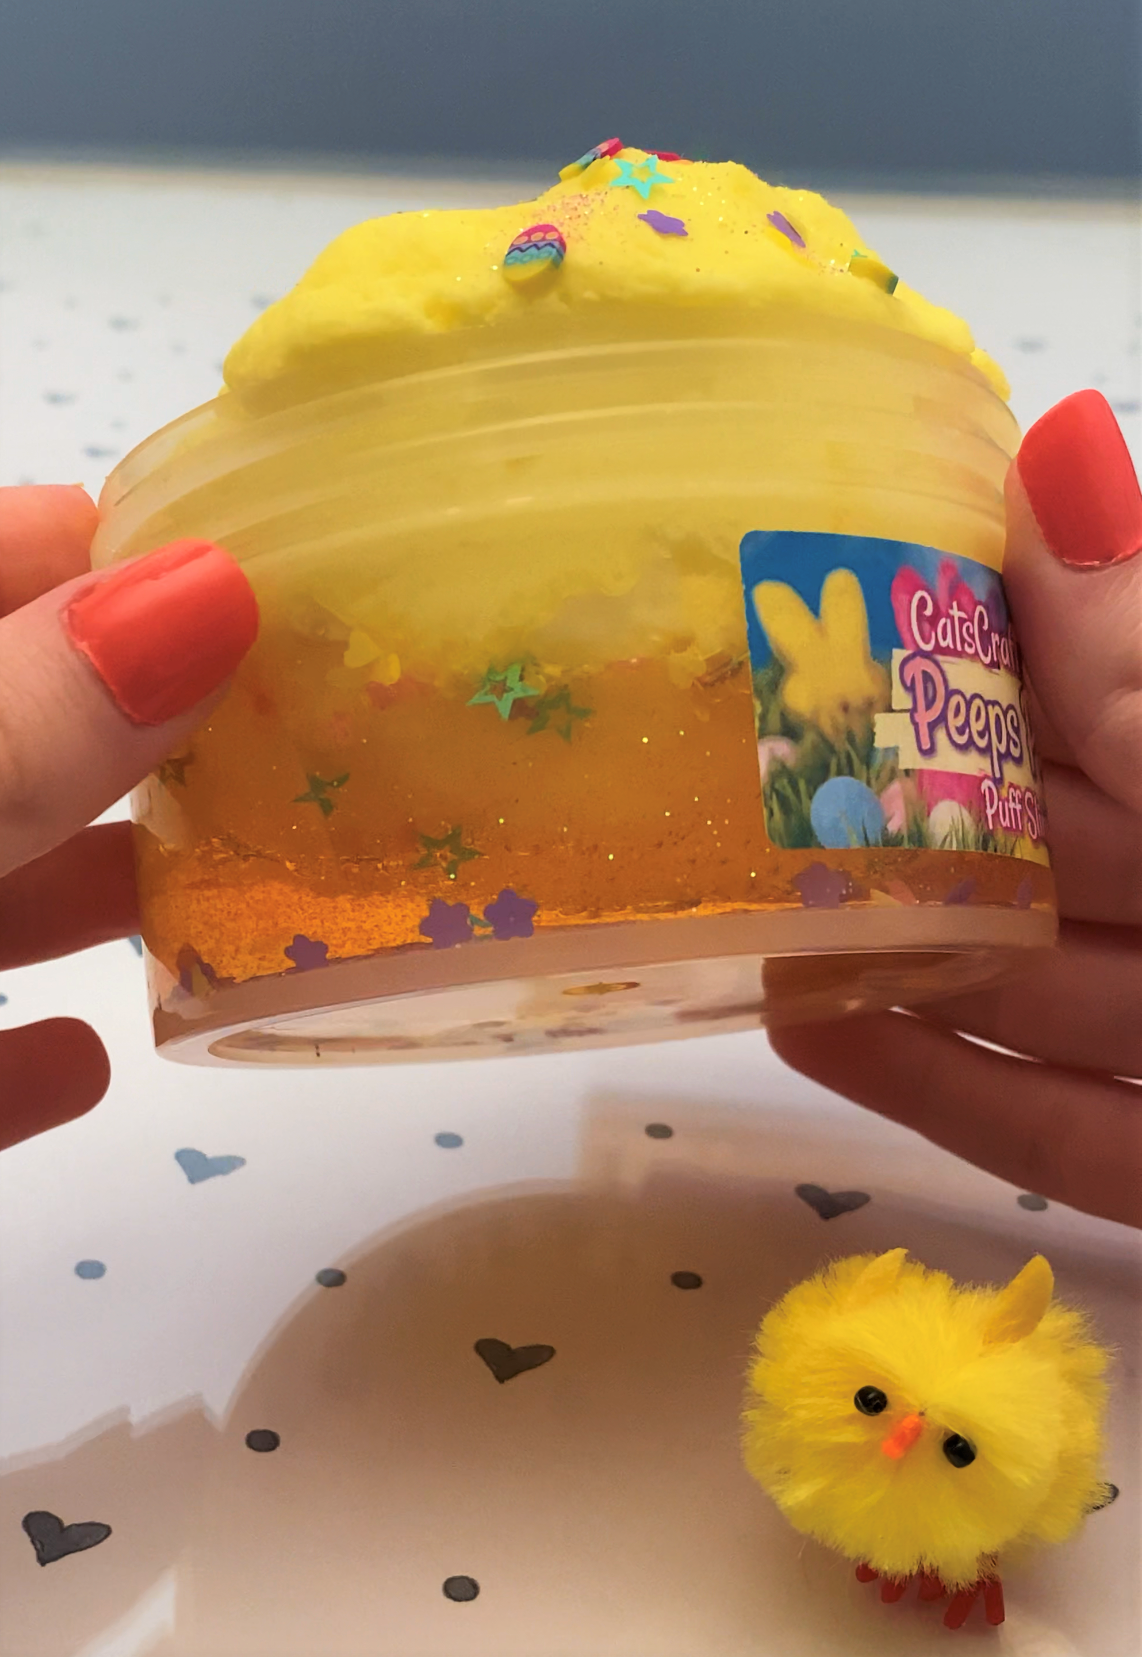 Puff Slime "Peeps Puff" Scented Yellow Clear Slime with charm ASMR 6 8 oz Easter